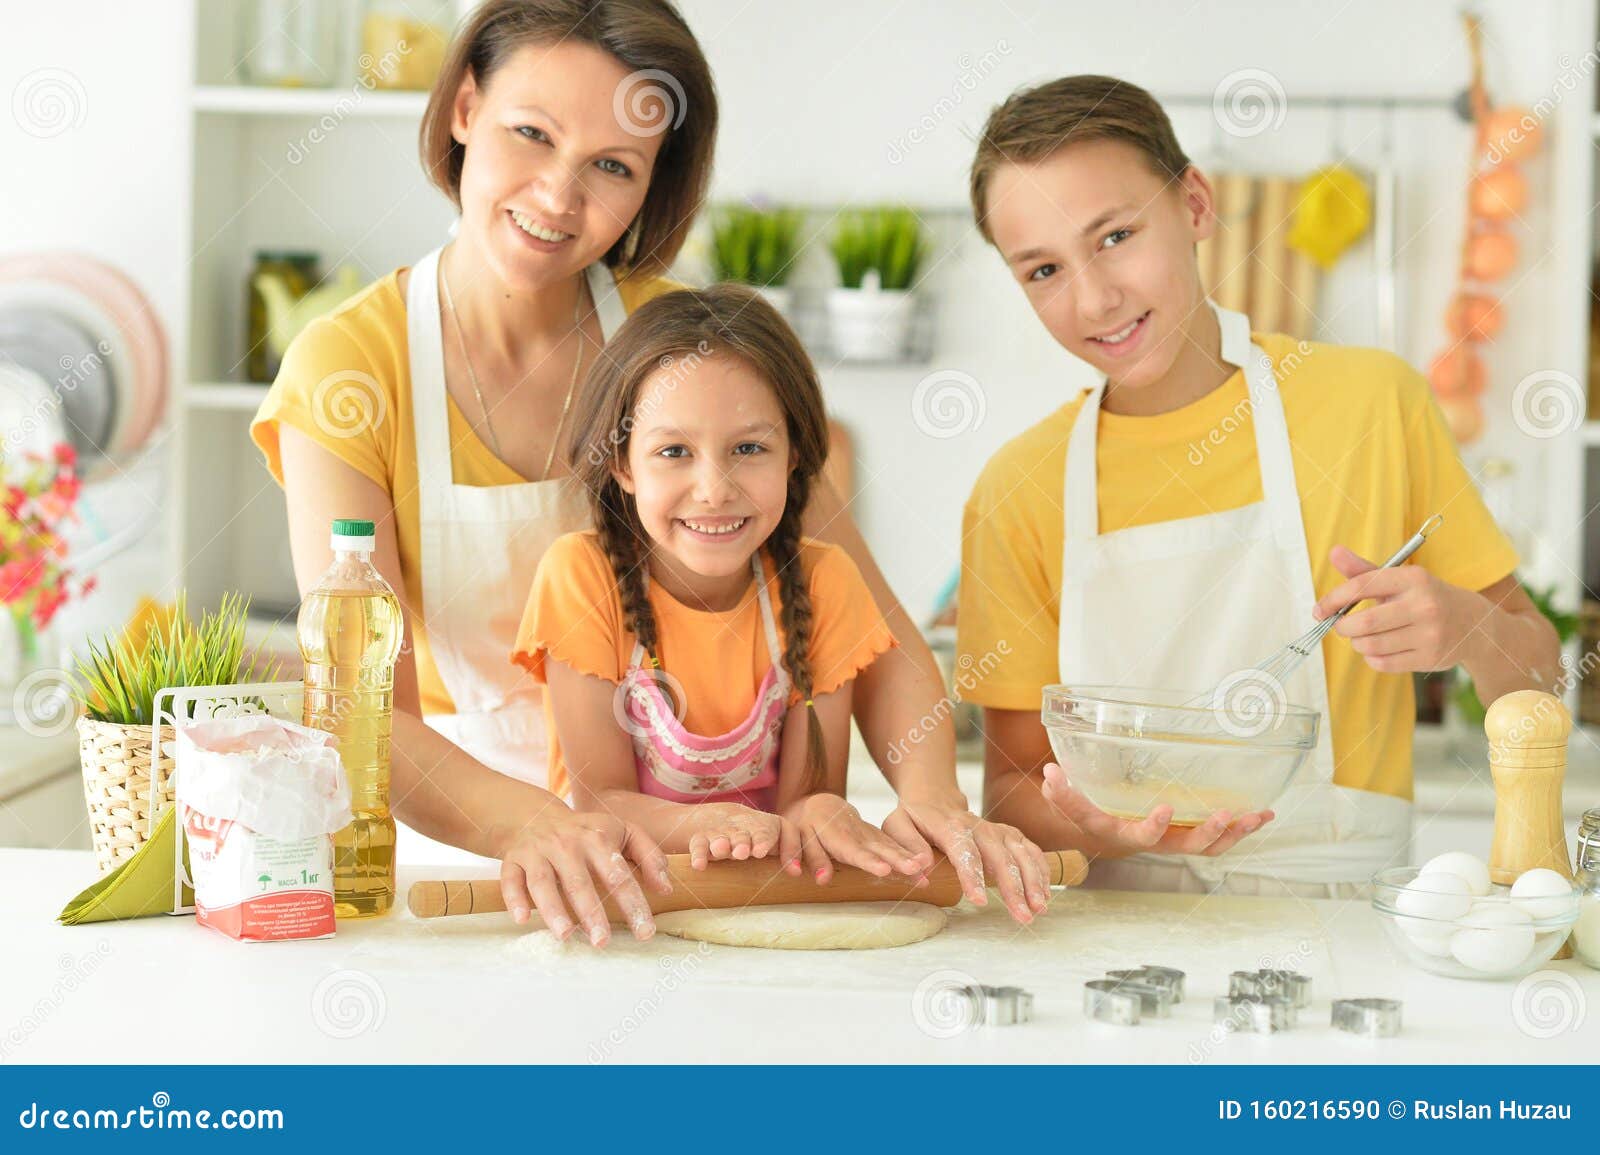 Portrait of Happy Family Baking Together in the Kitchen Stock Photo